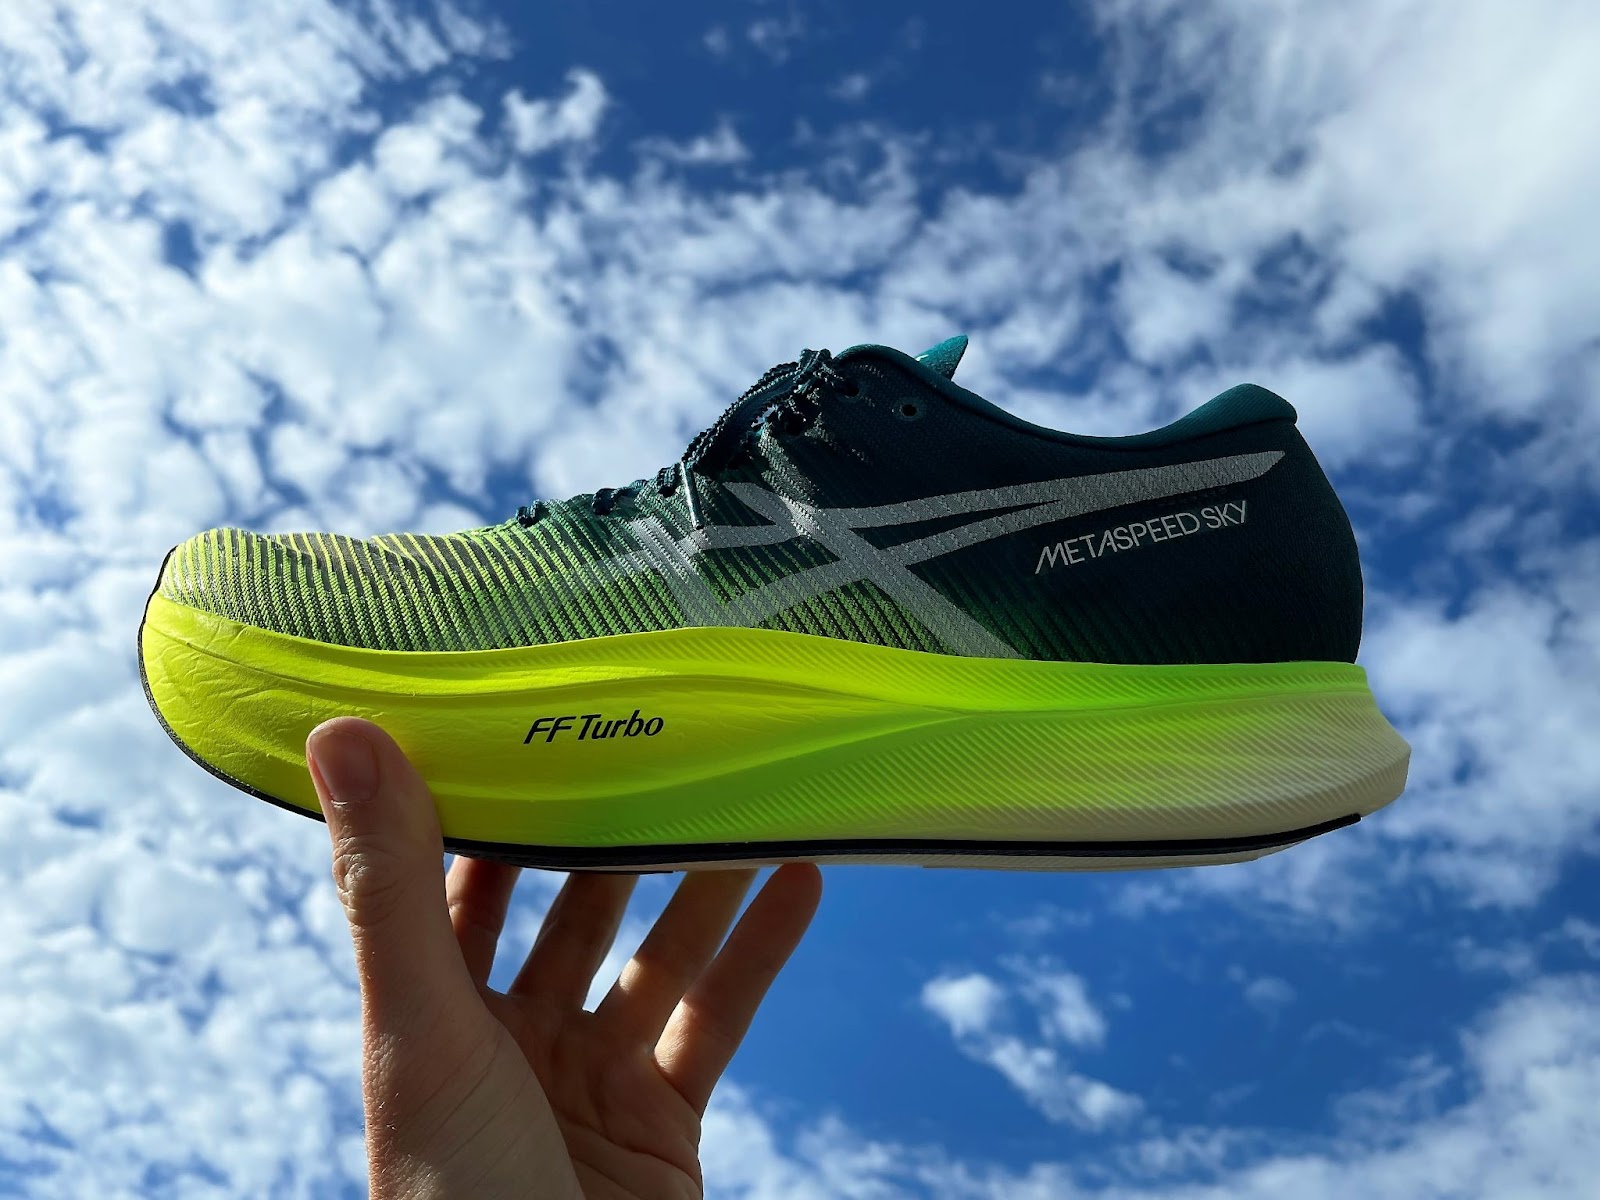 Road Trail Run: ASICS Metaspeed Sky+ In Depth Review – Is More Better?